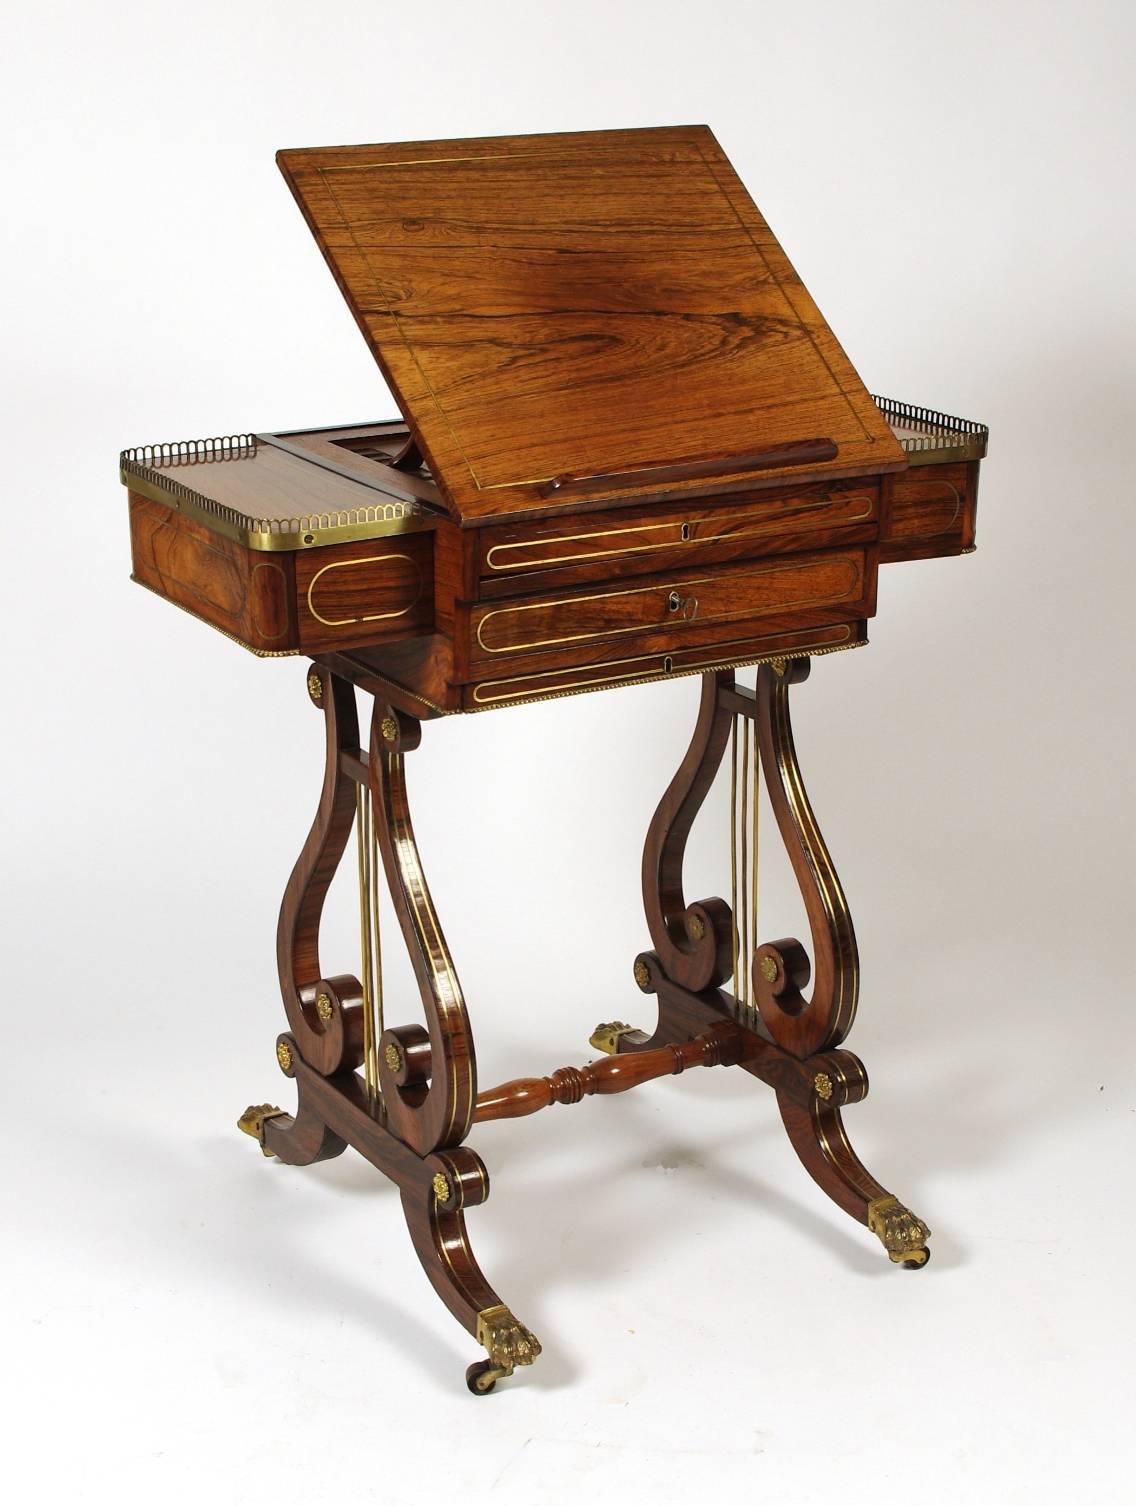 English Fine Regency Rosewood Games or Work Table